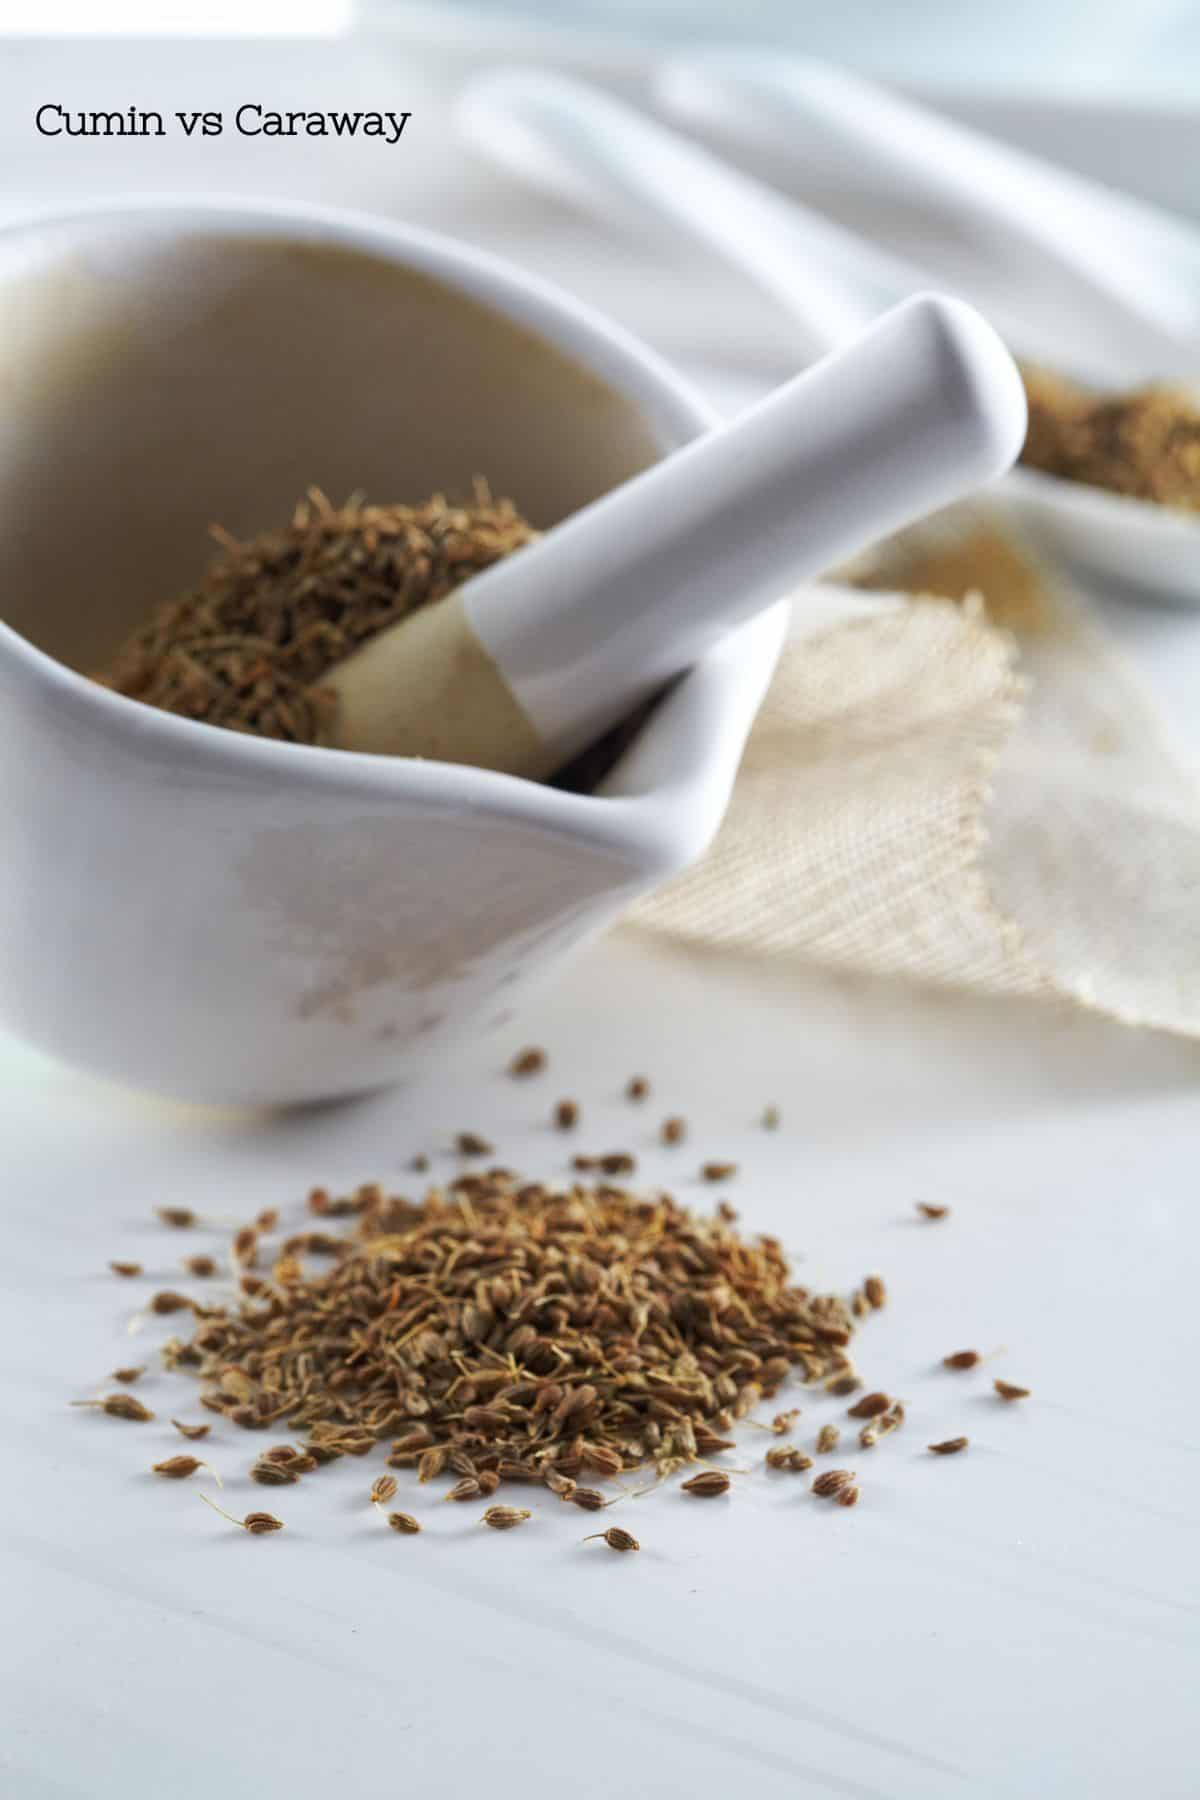 A white mortar and pestle with caraway or cumin seeds in it and in a pile in front of it.